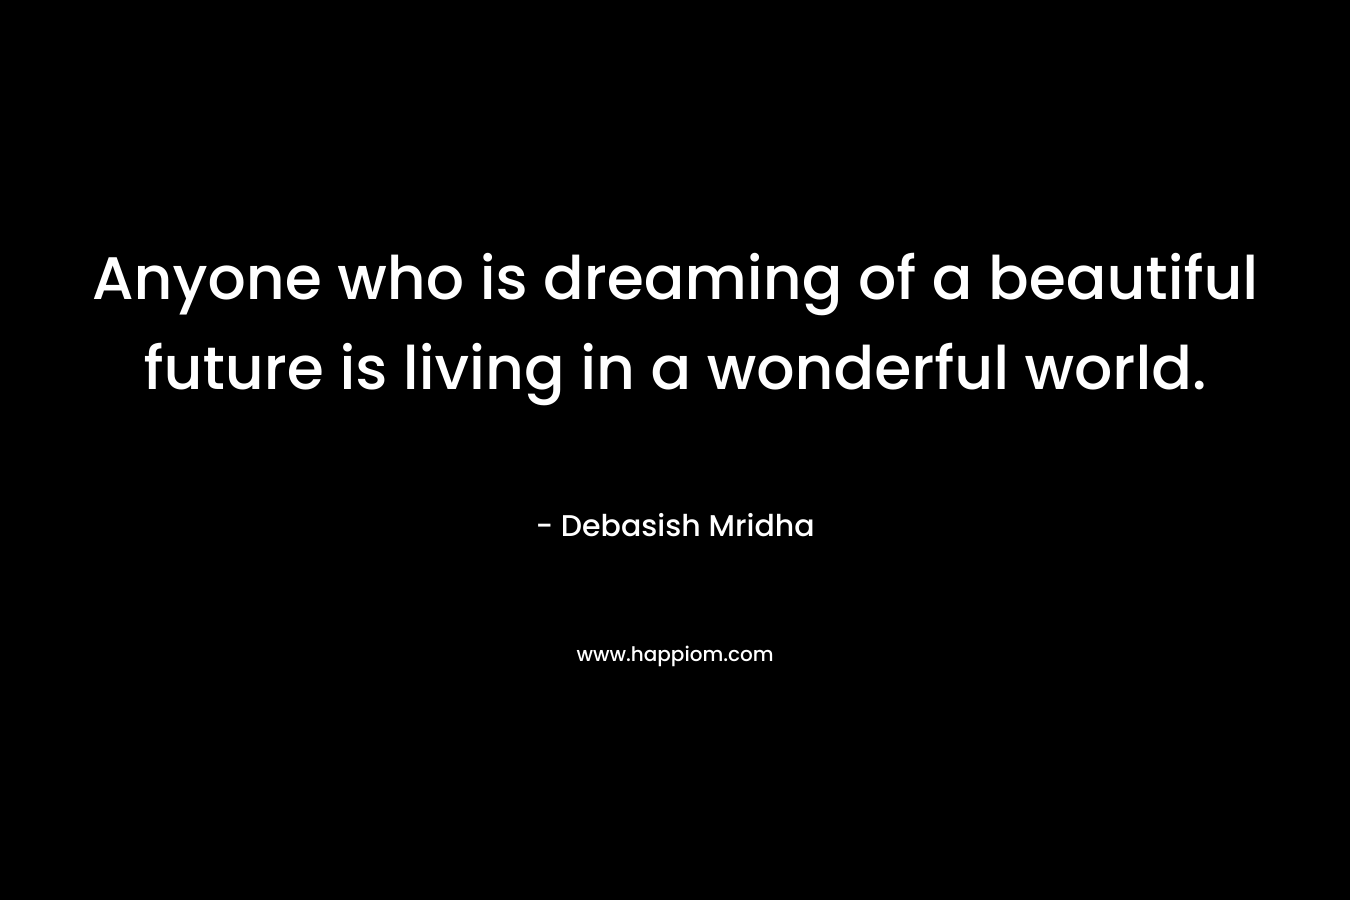 Anyone who is dreaming of a beautiful future is living in a wonderful world.